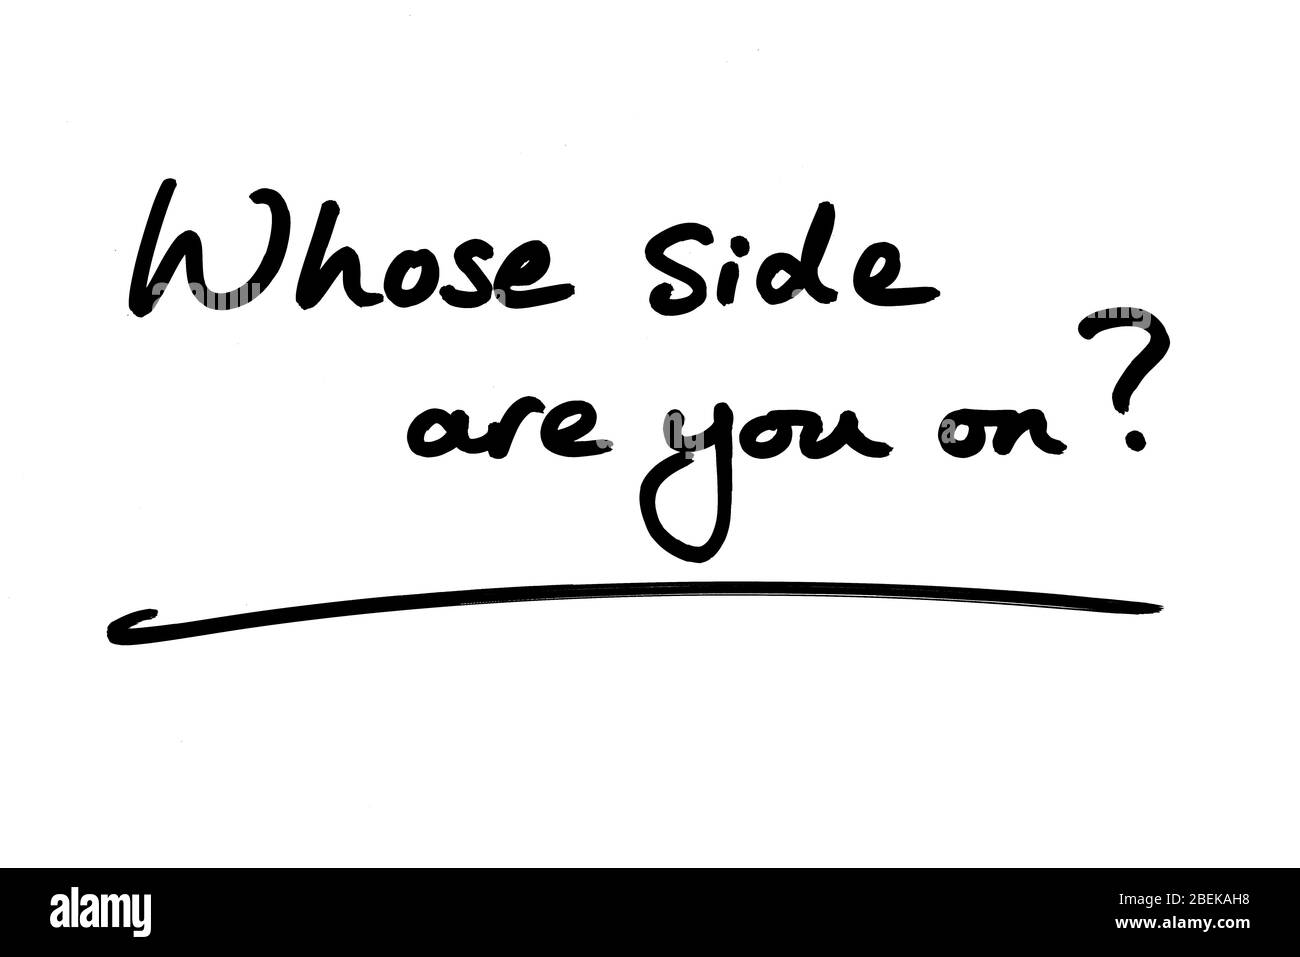 Whose side are you on? handwritten on a white background. Stock Photo